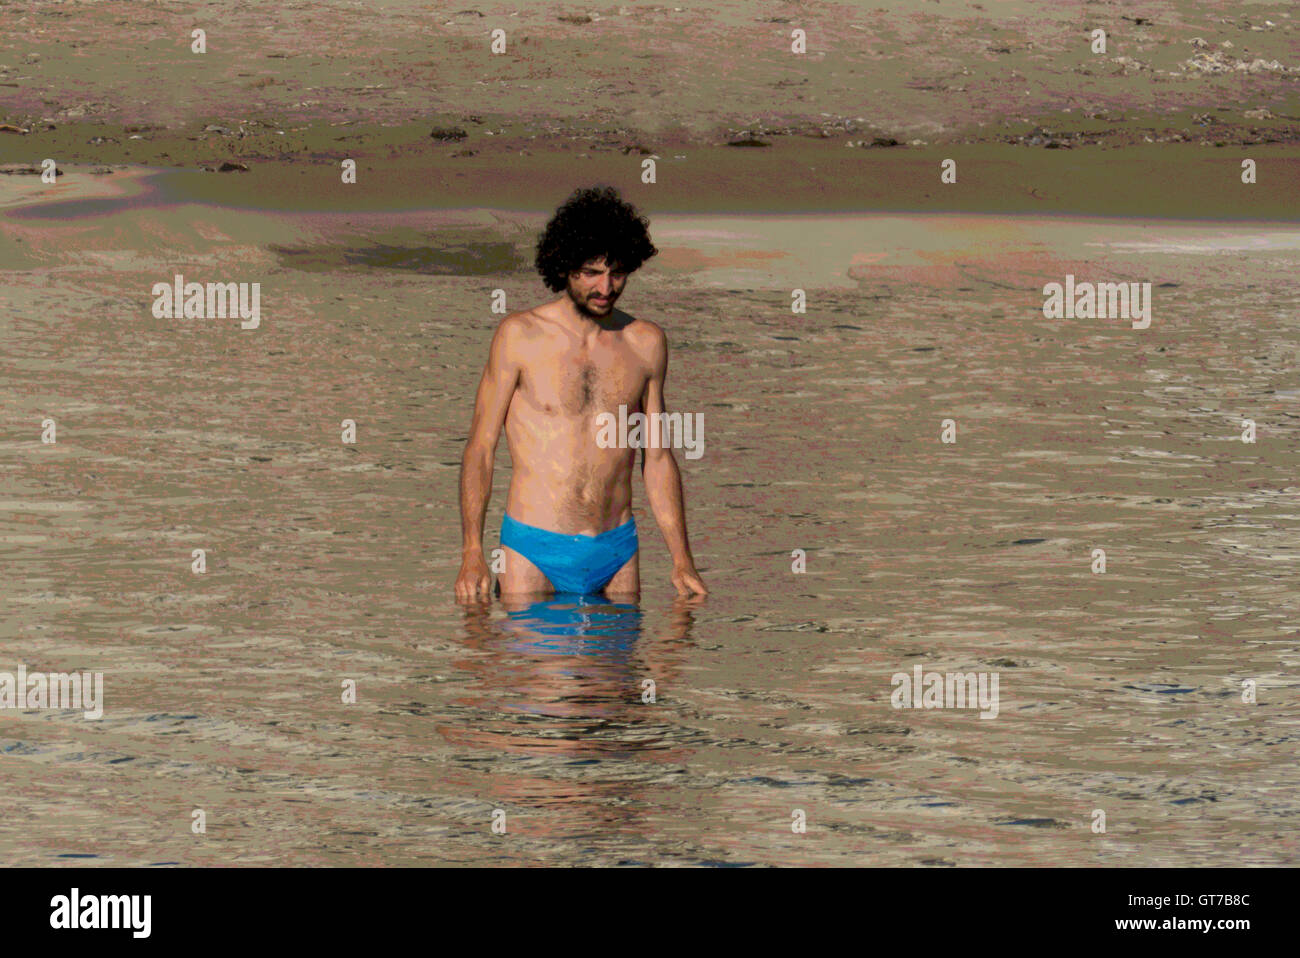 A young man big hair enters water Cefalu,Sicily Stock Photo